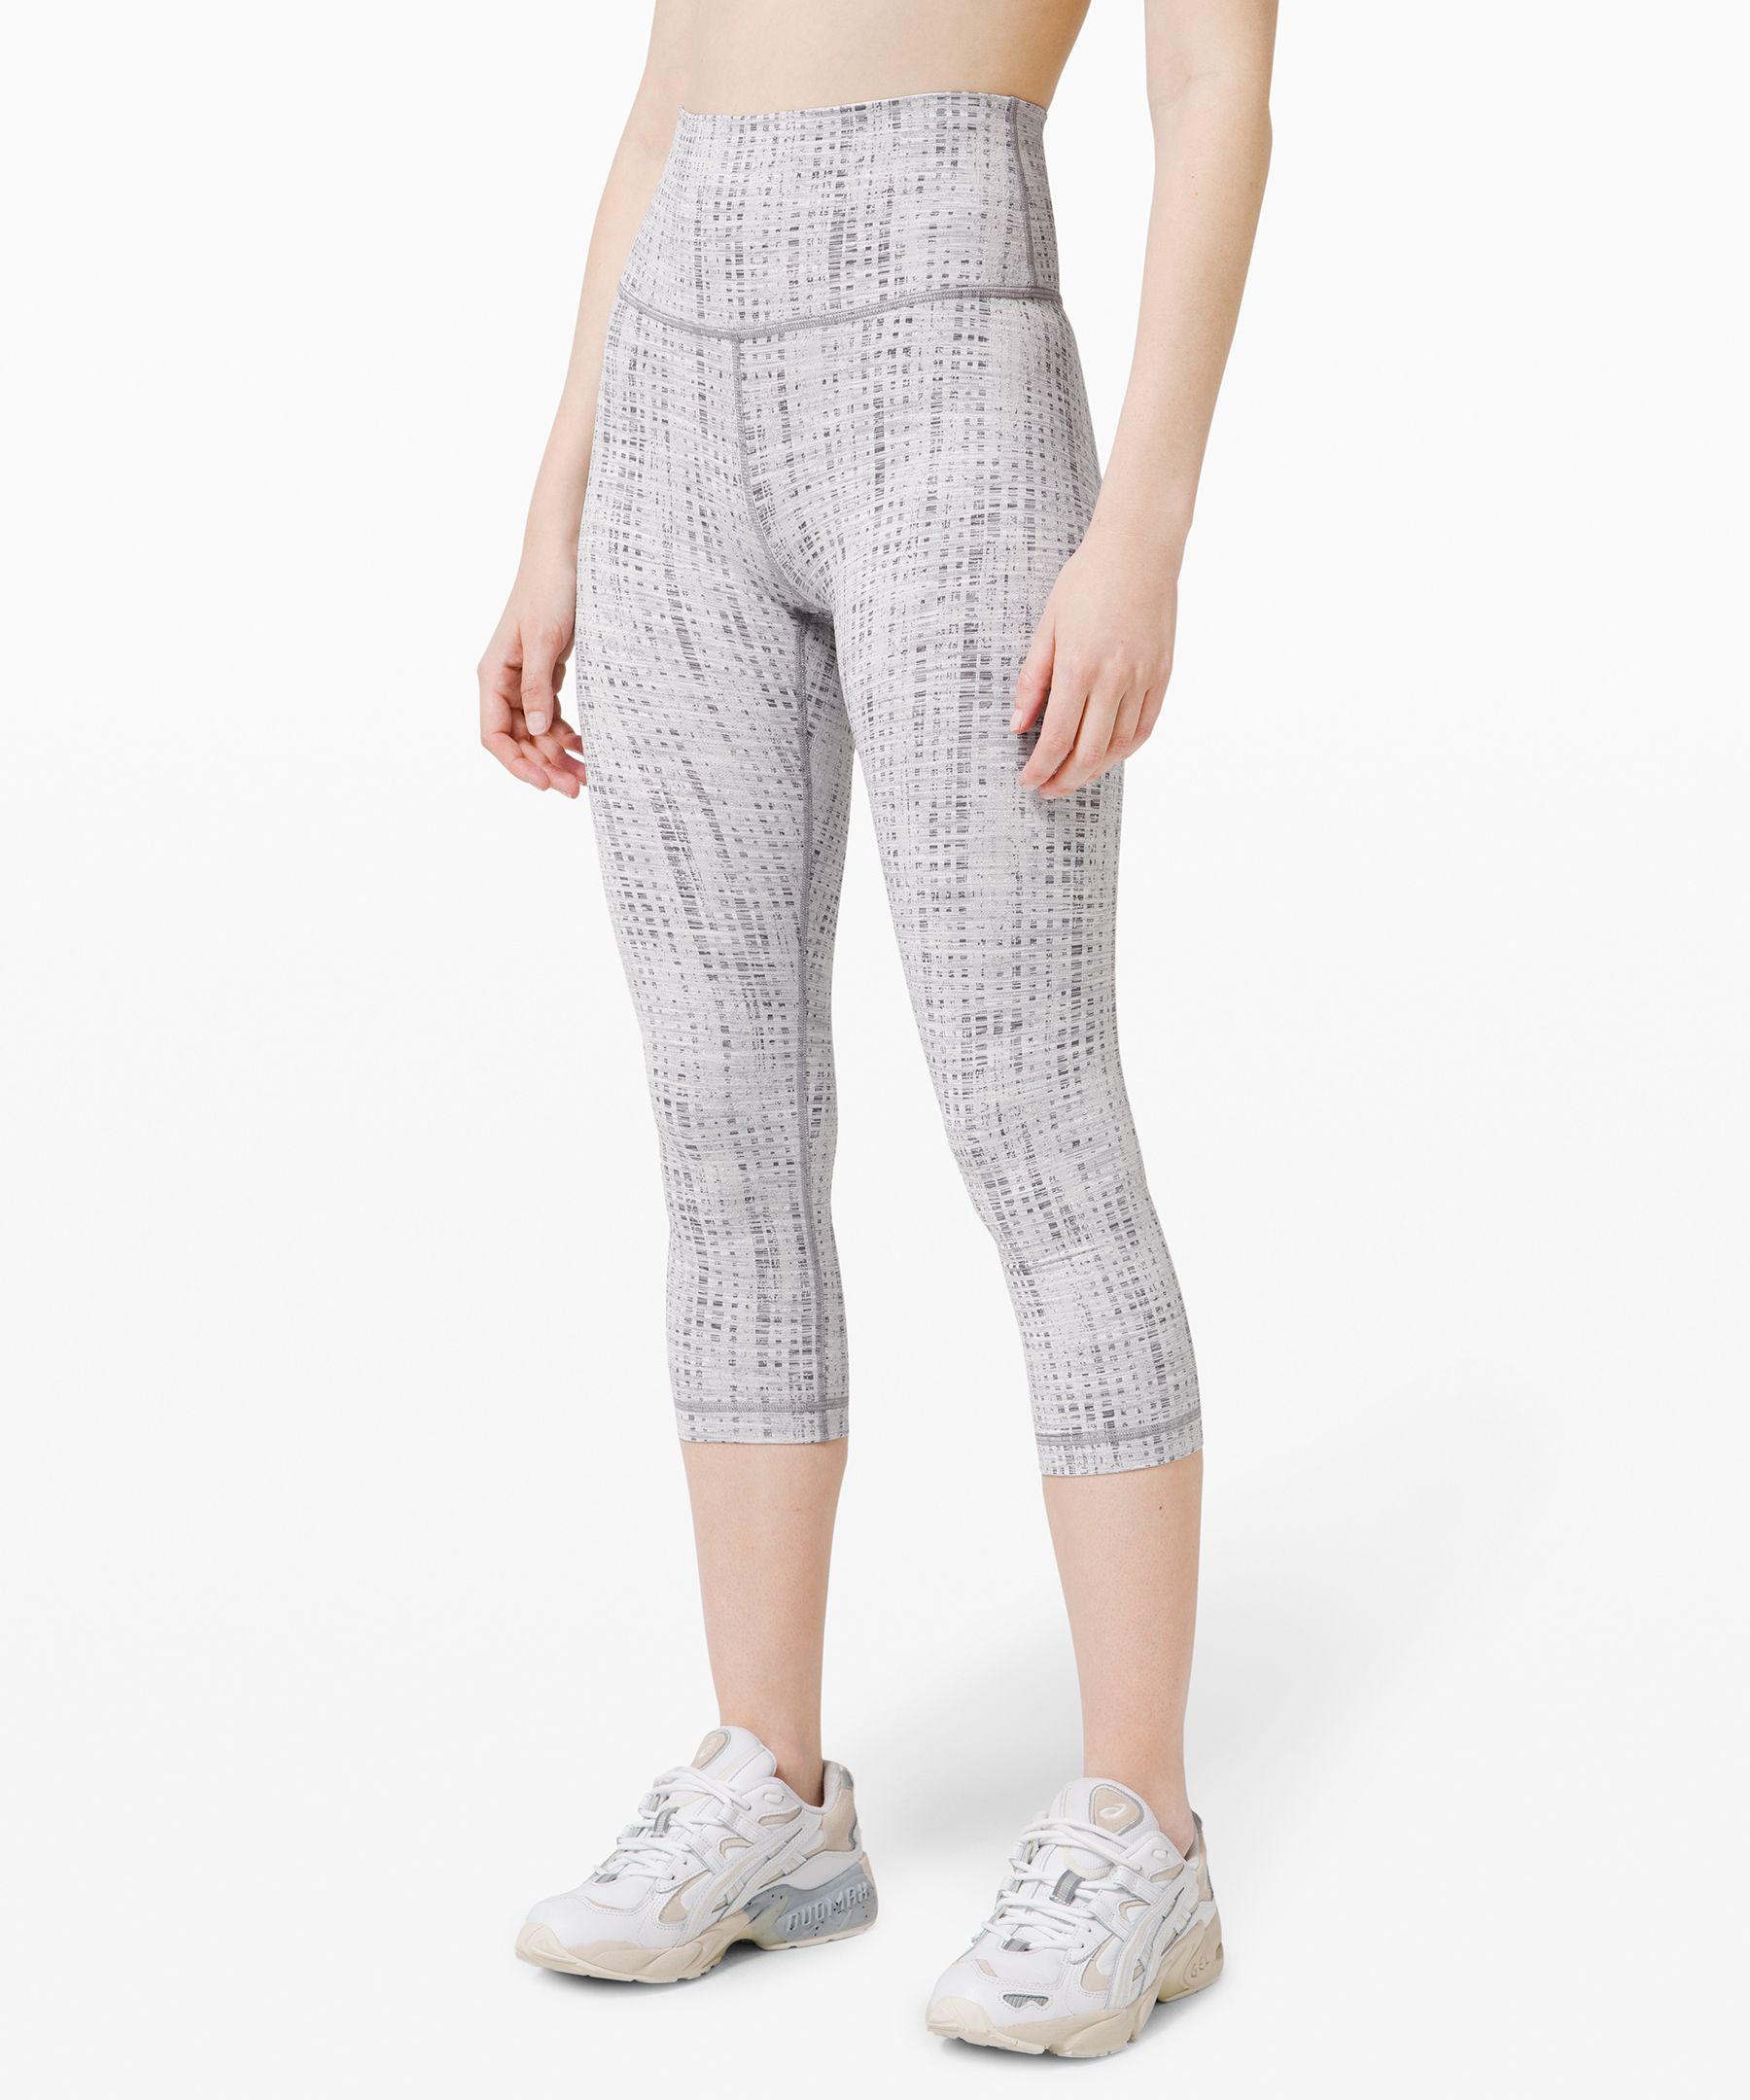 Lululemon Wunder Under Crop (high-rise) *luxtreme 21" In Action Jacquard Moonphase Silver Lining